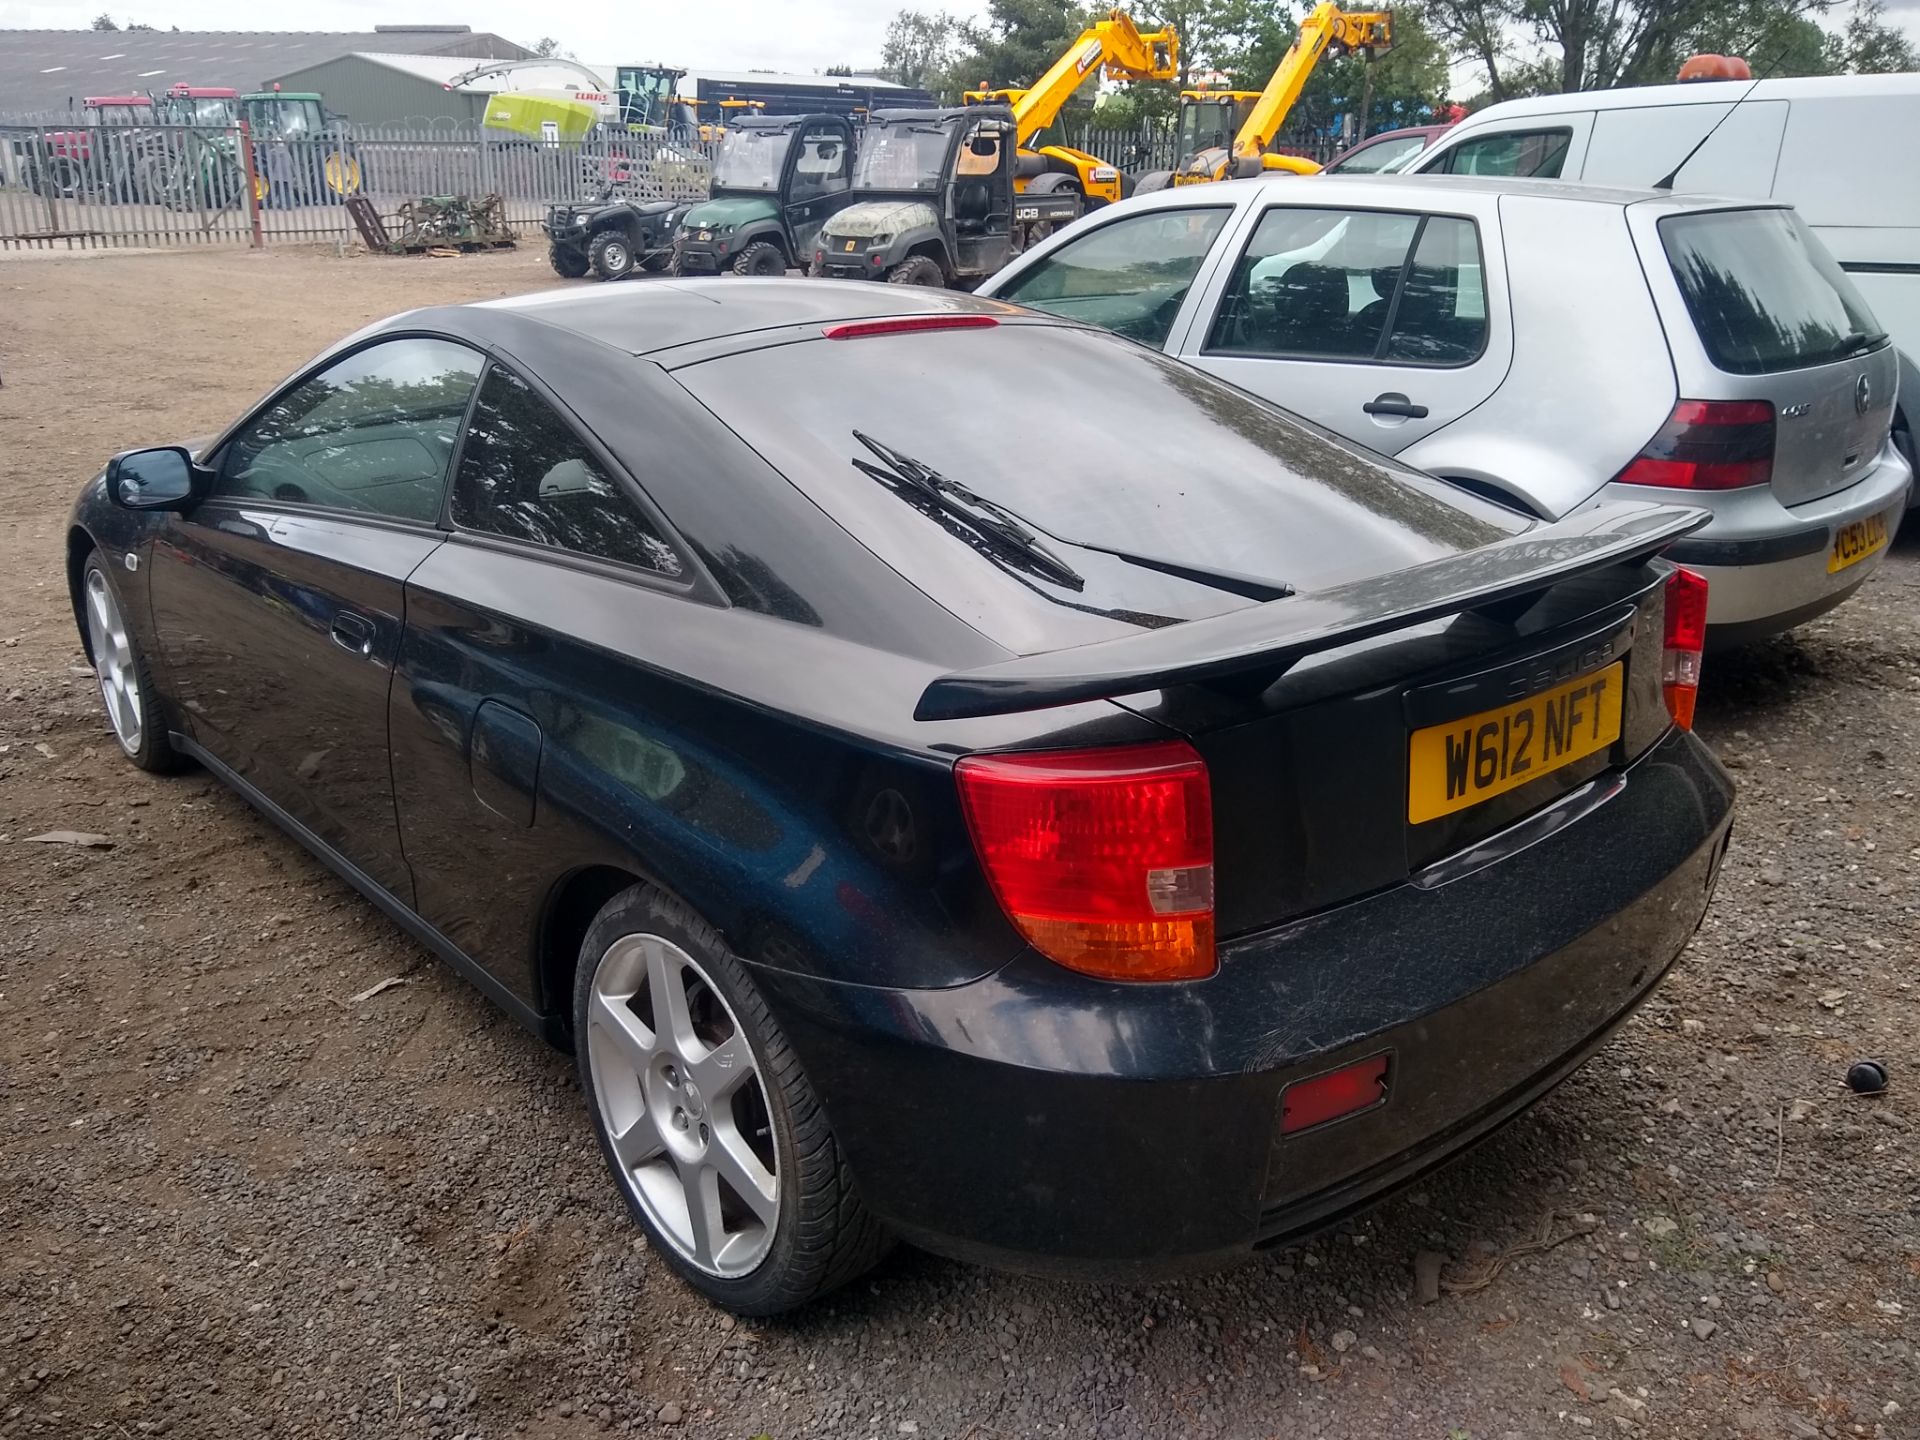 Toyota Celica VVTi coupe, 1794cc, unused for 3 years, runs and drives, no rear silencer, W612 NFT - Image 7 of 9